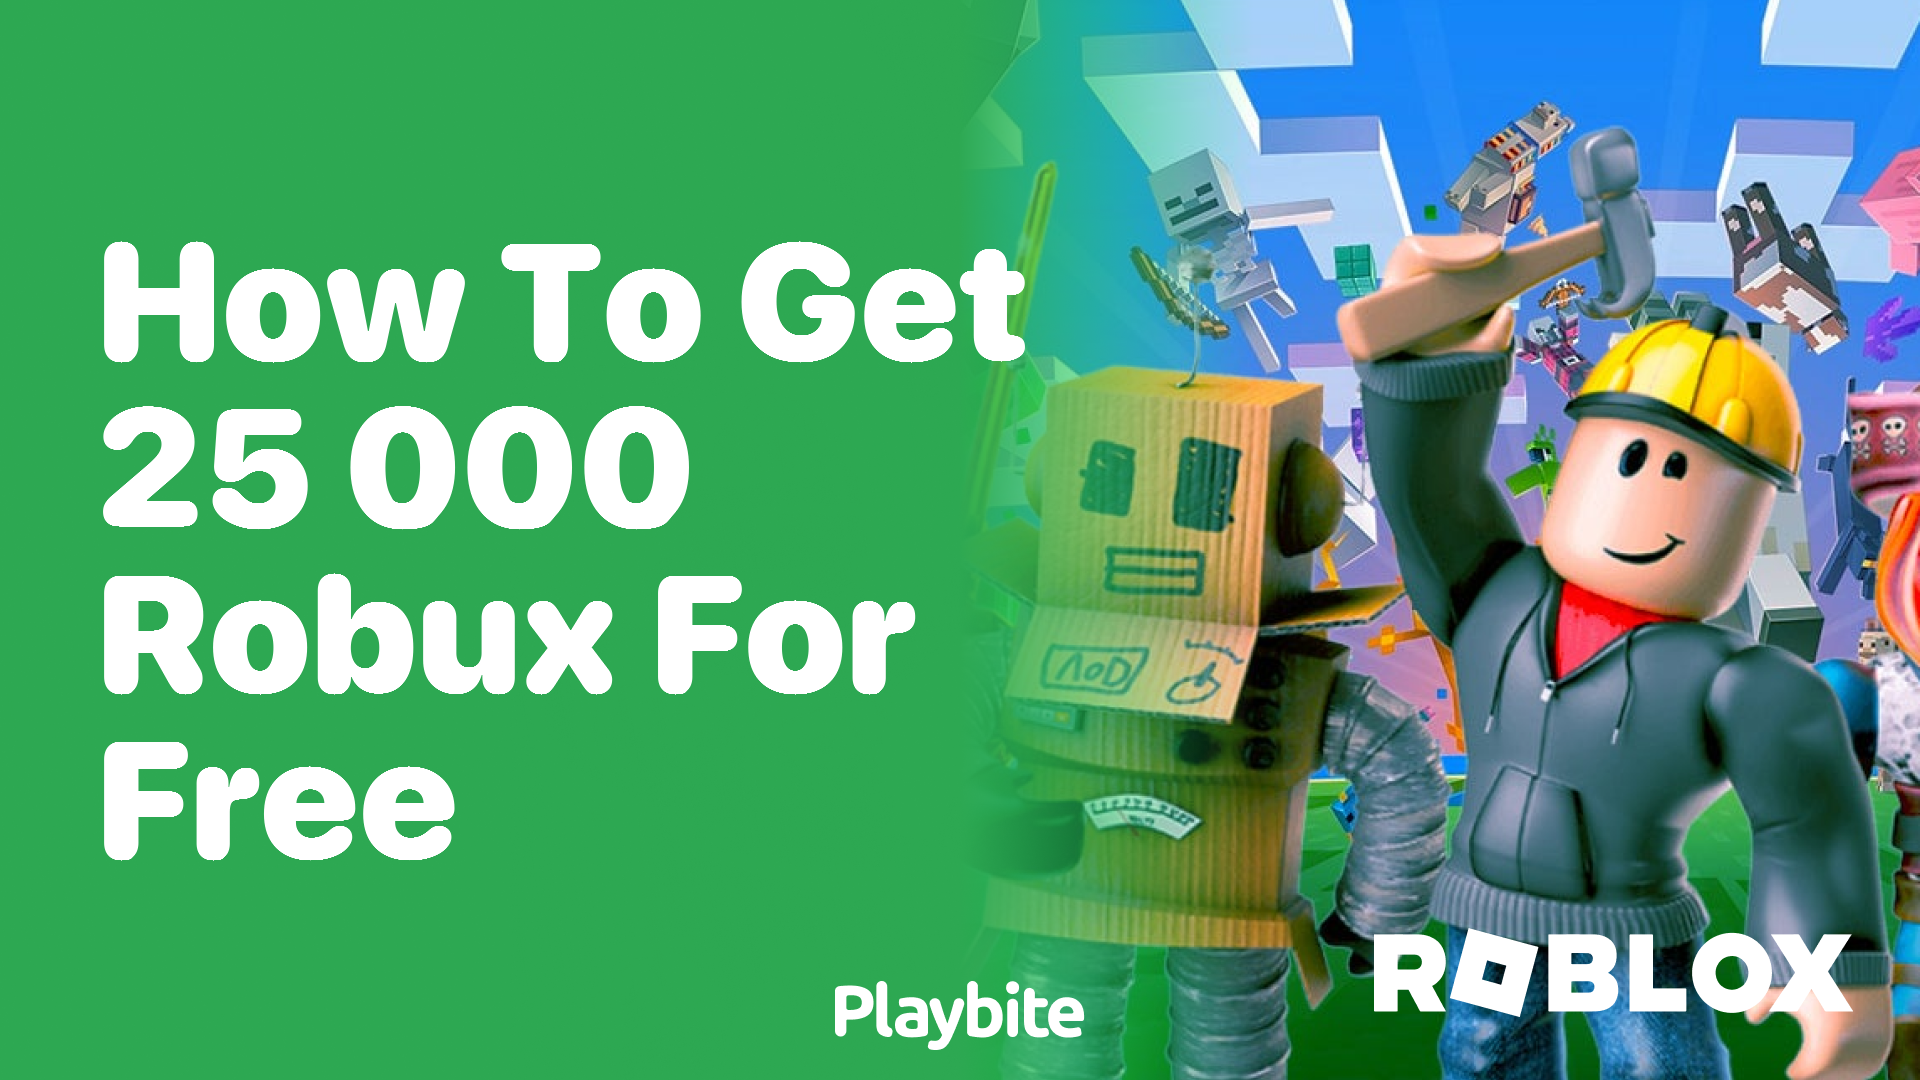 How to Get 25,000 Robux for Free